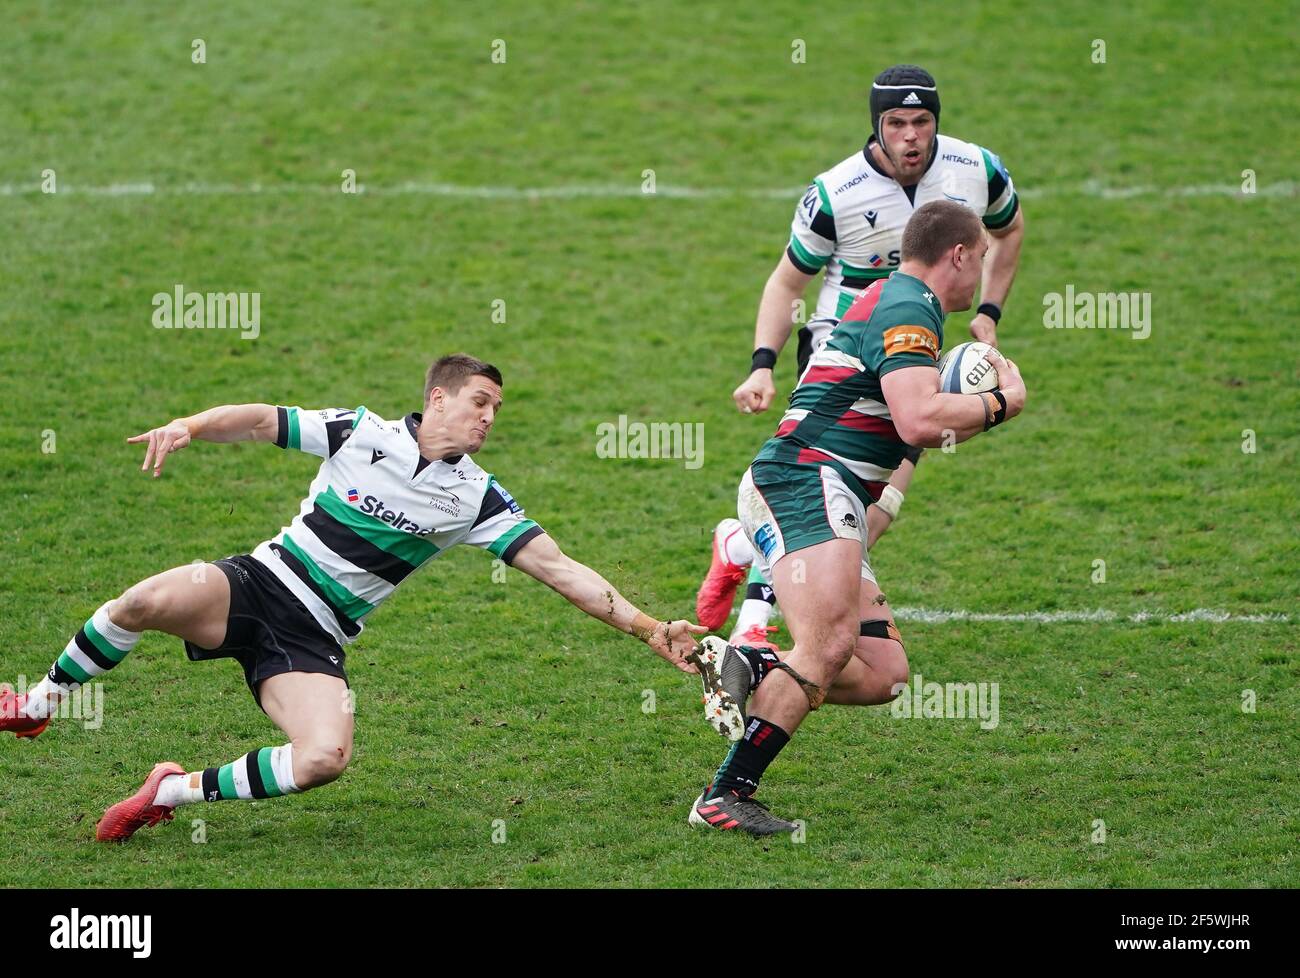 Leicester Tigers' Jasper Wiese (right) evades a tackle from Newcastle Falcons' Louis Schreuder during the Gallagher Premiership match at the Mattioli Woods Welford Road Stadium, Leicester. Picture date: Sunday March 28, 2021. Stock Photo